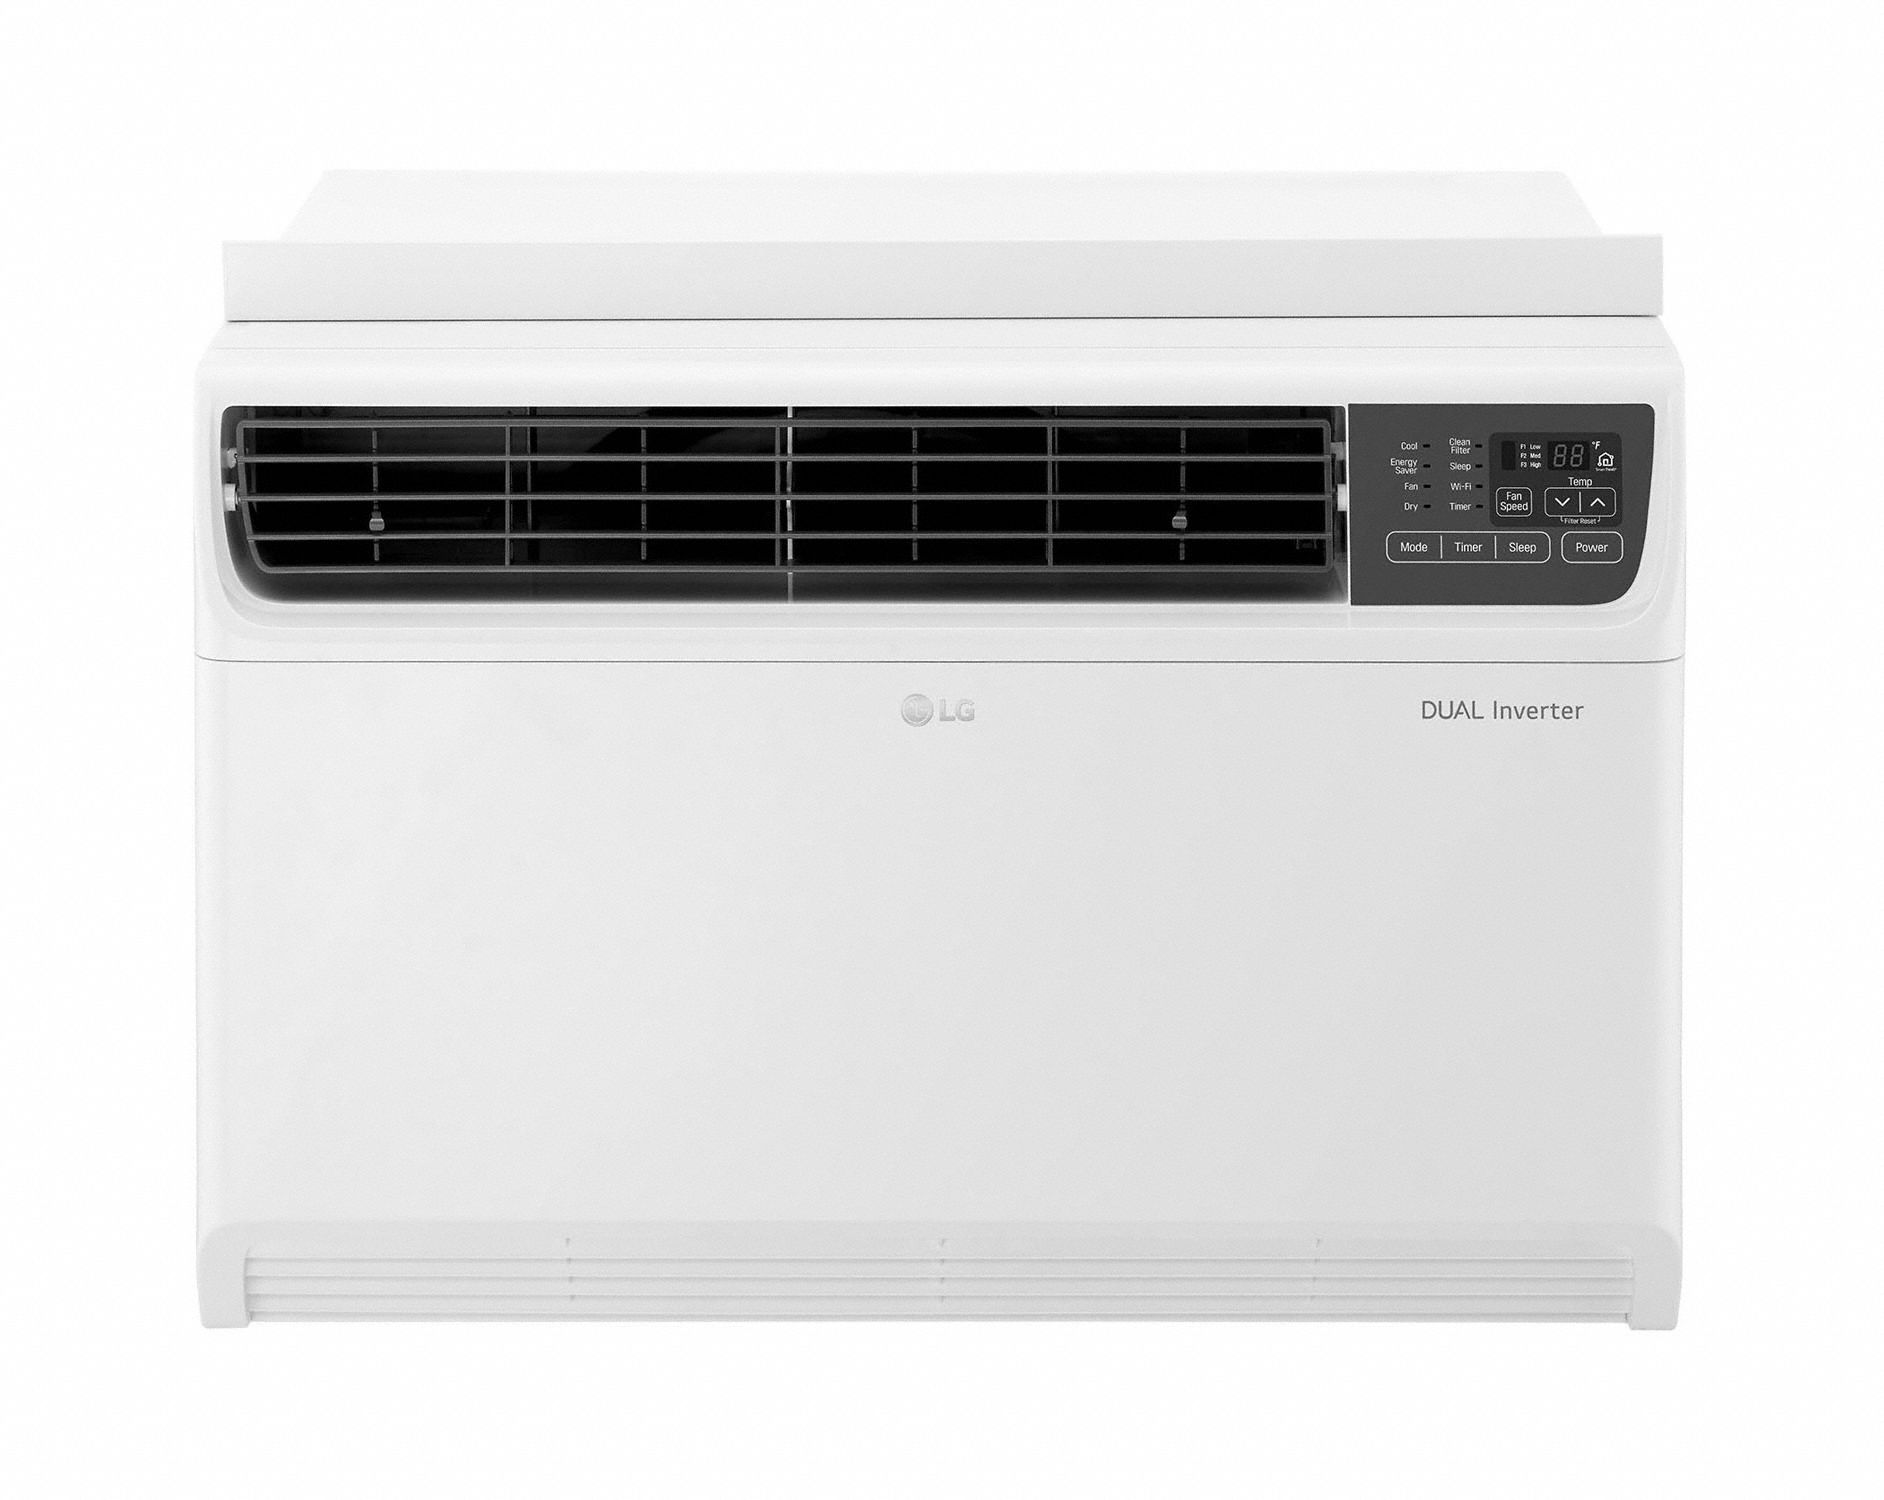 Window Air Conditioner: 18,000 BtuH, 700 to 1000 sq ft